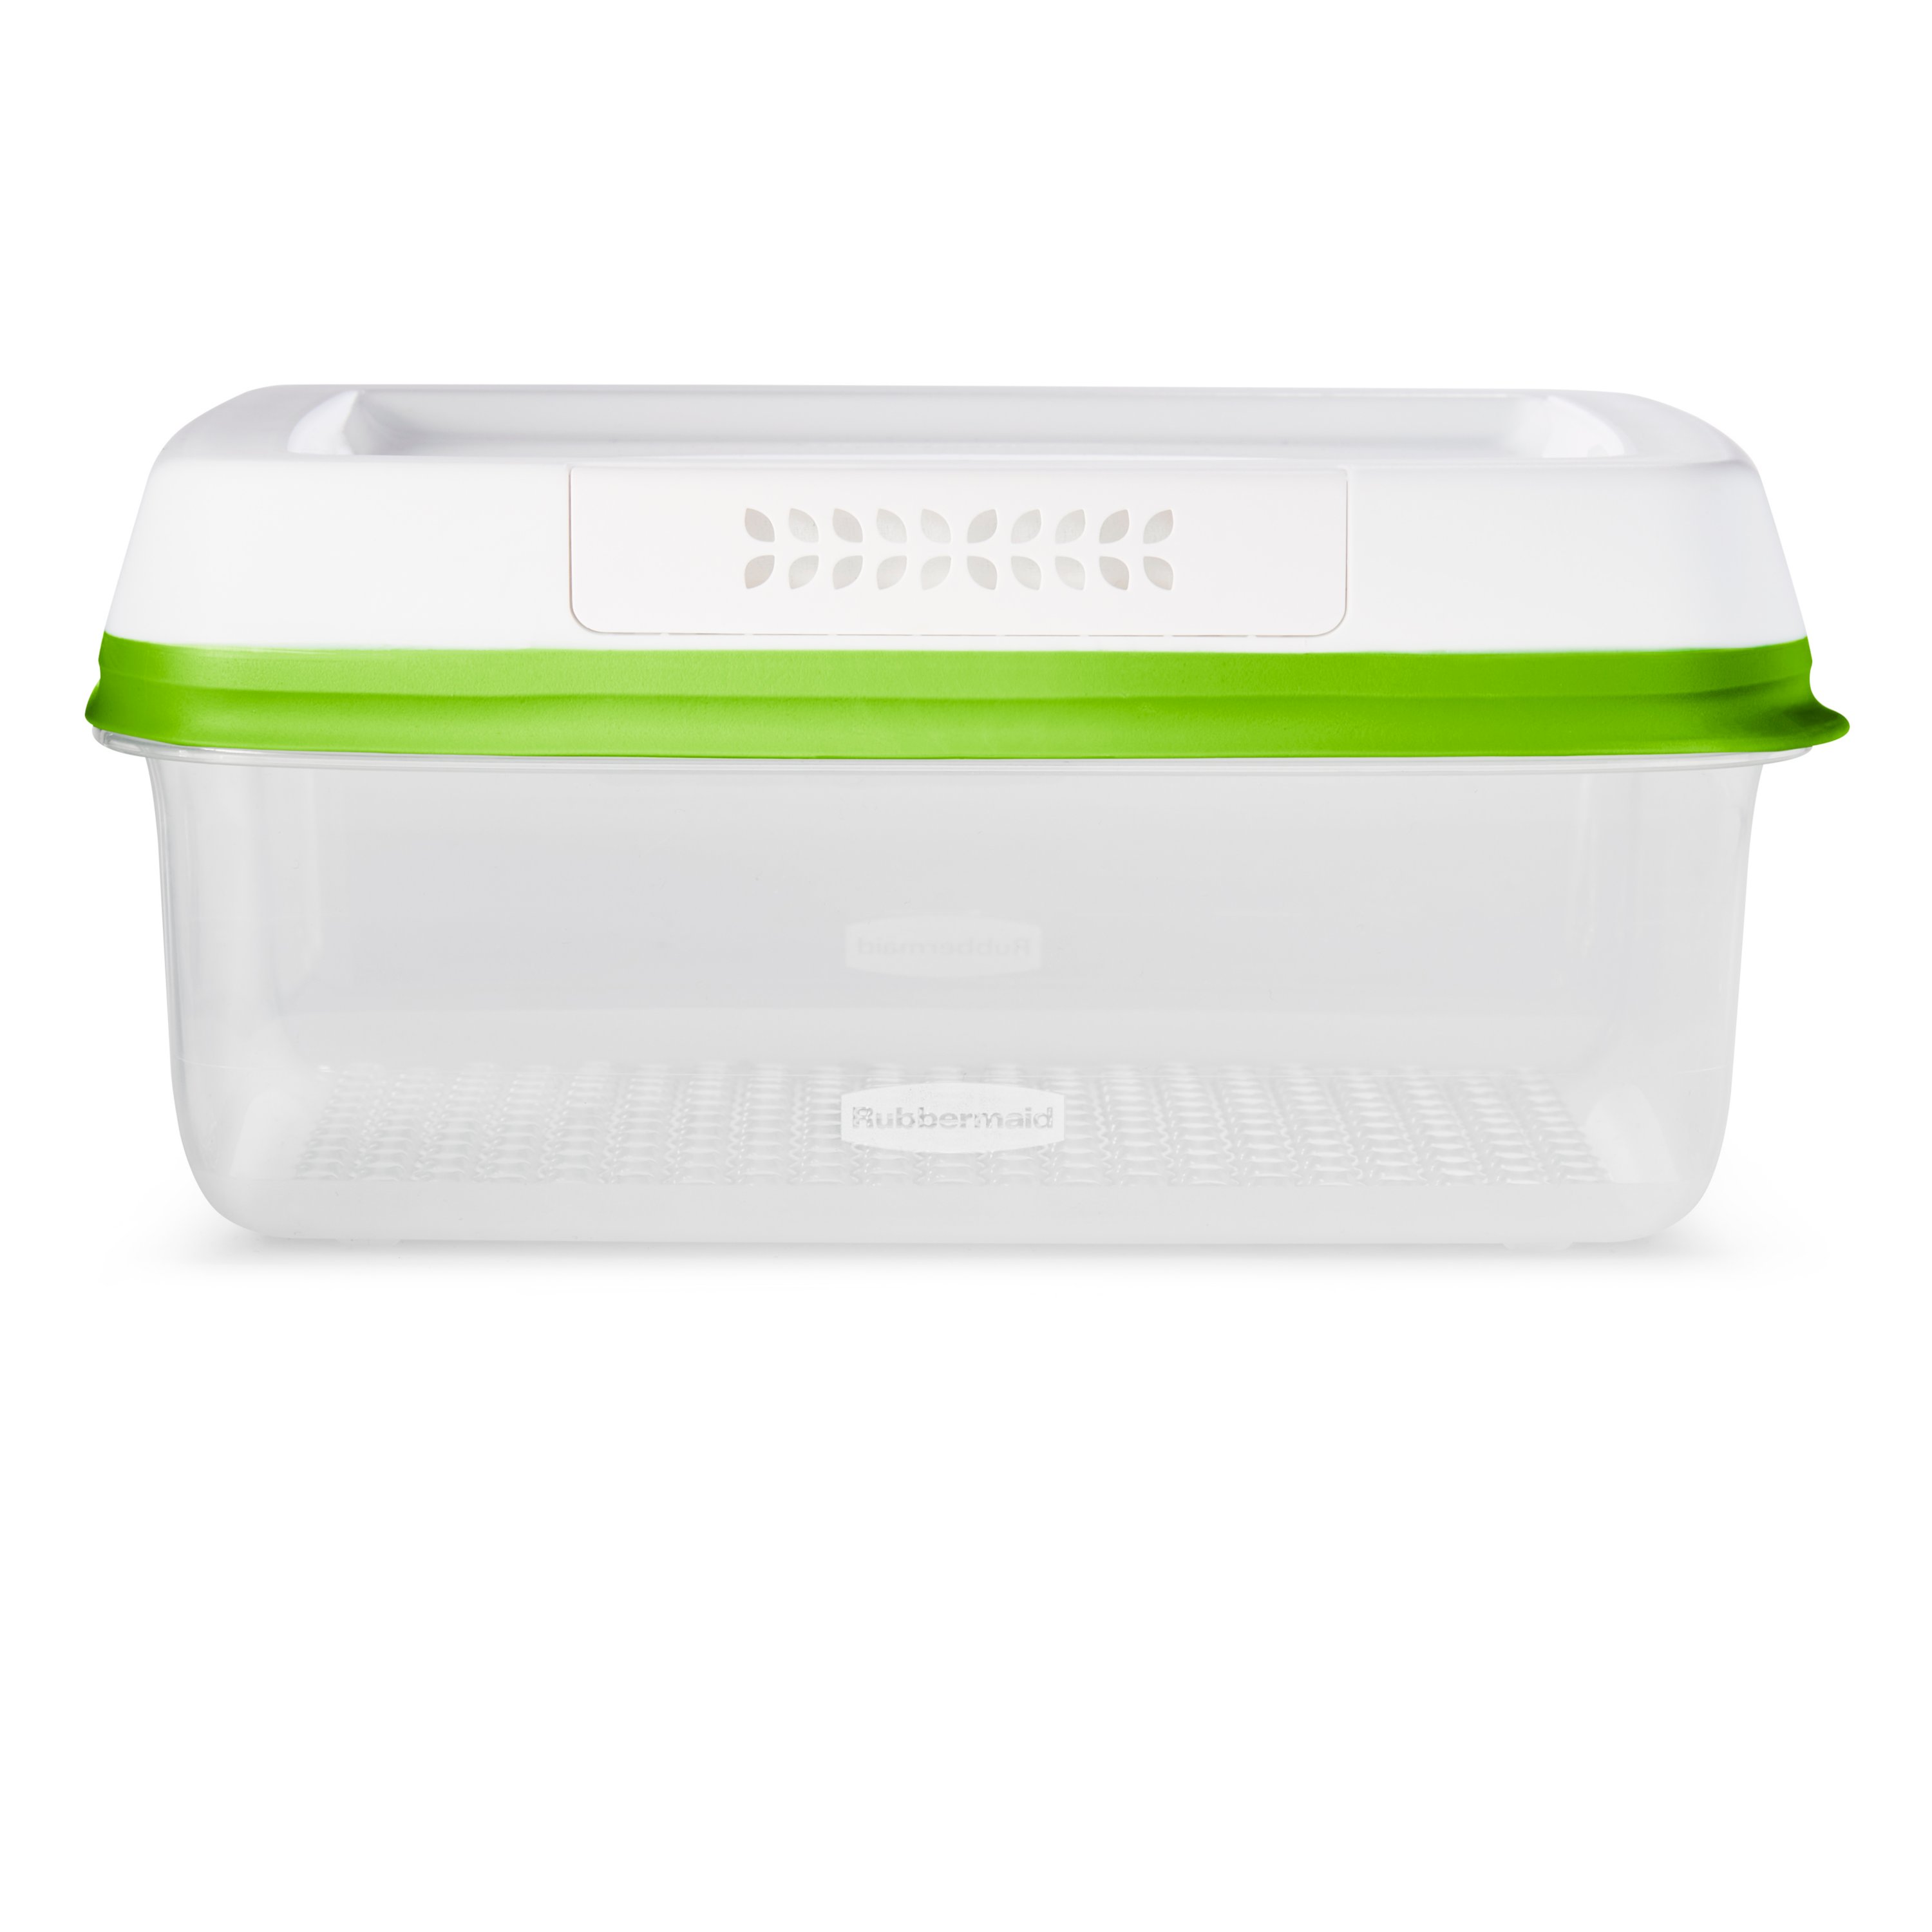 https://s7d9.scene7.com/is/image/NewellRubbermaid/2114816-rubbermaid-food-storage-green-11.3c-large-short-straight-on